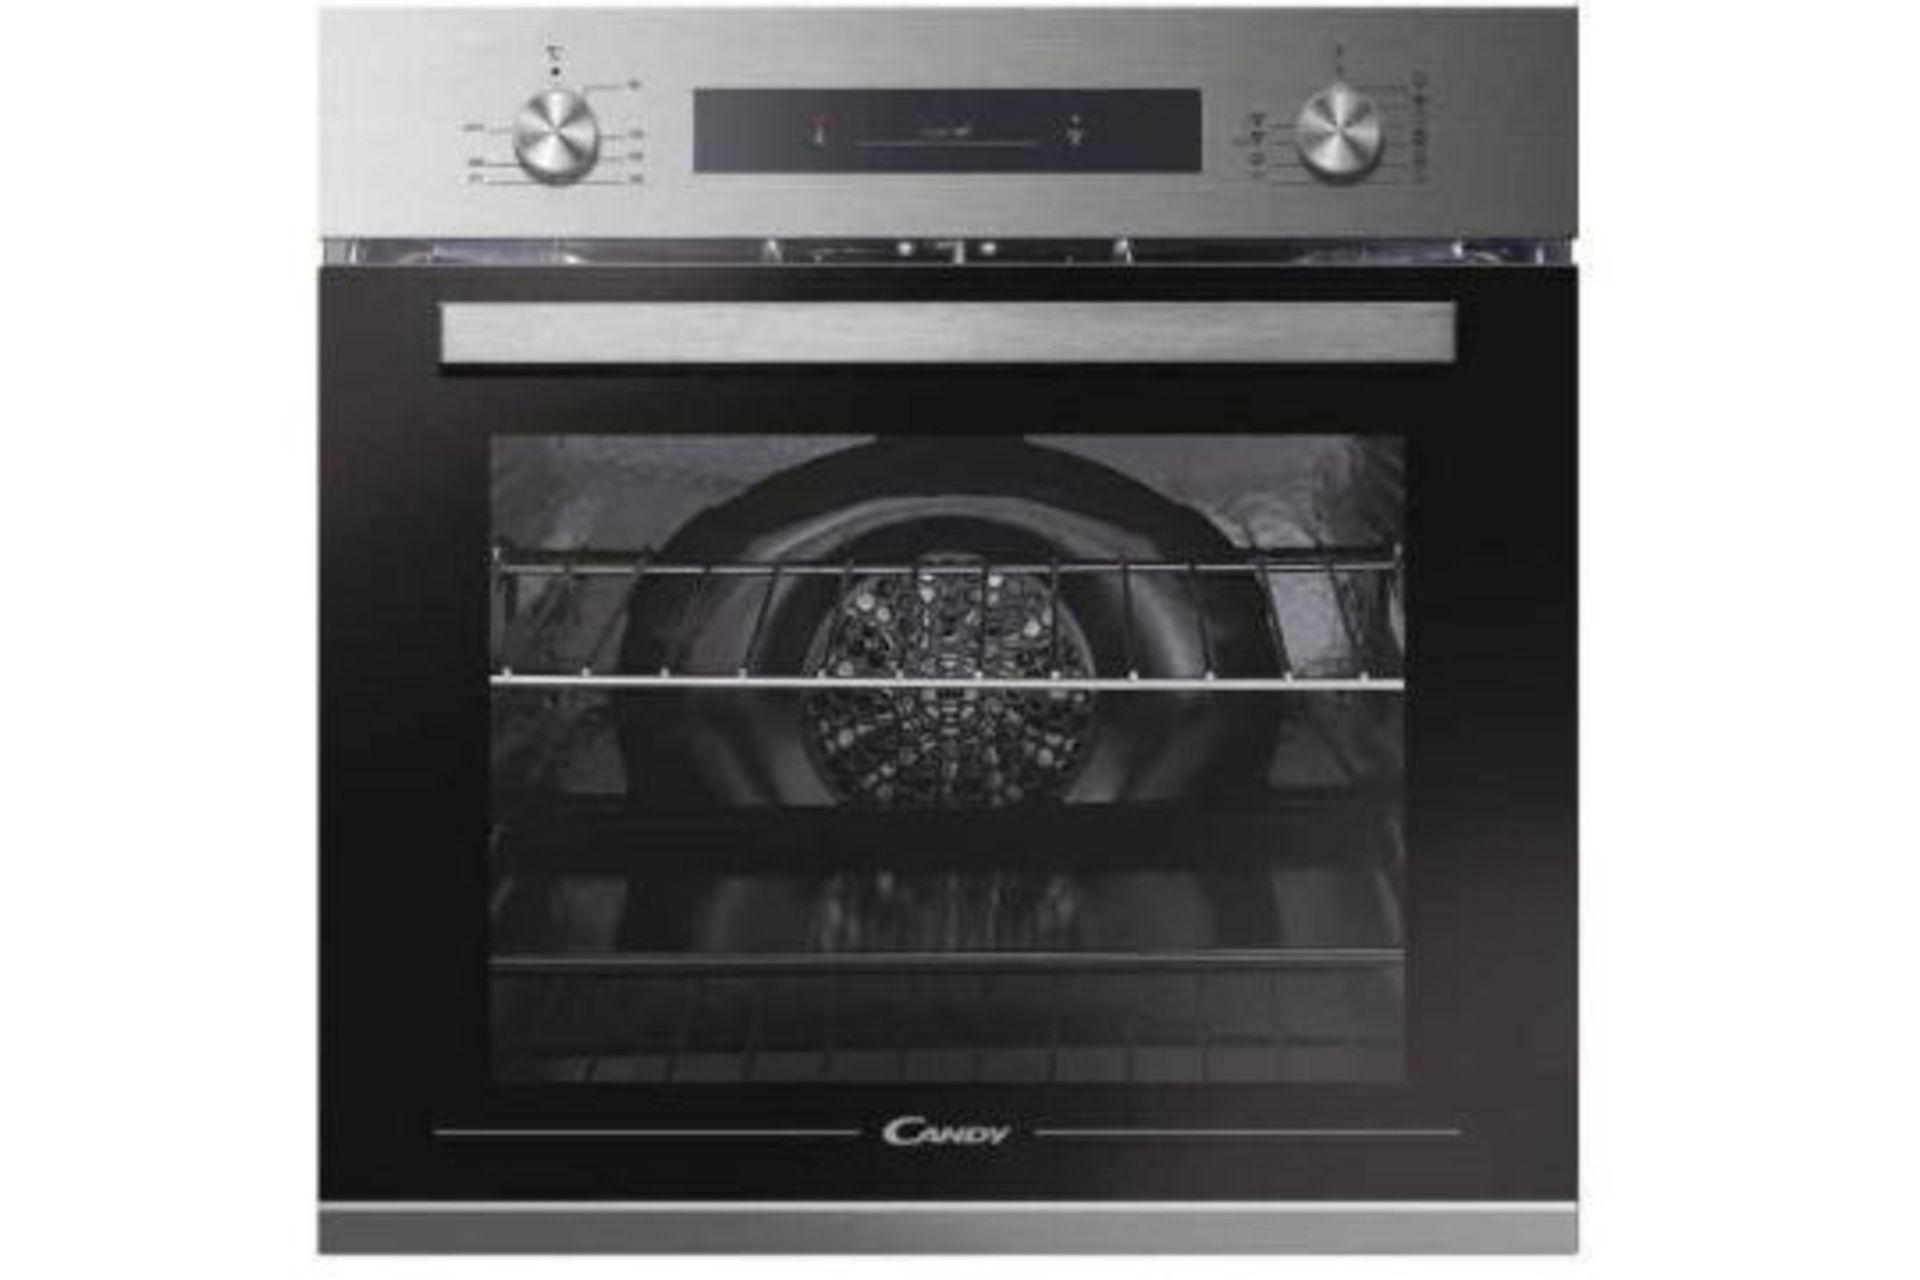 Candy Fcp602X E0/e Built-in Single Oven - Black - SR4. This 60cm multifunction oven has a touch